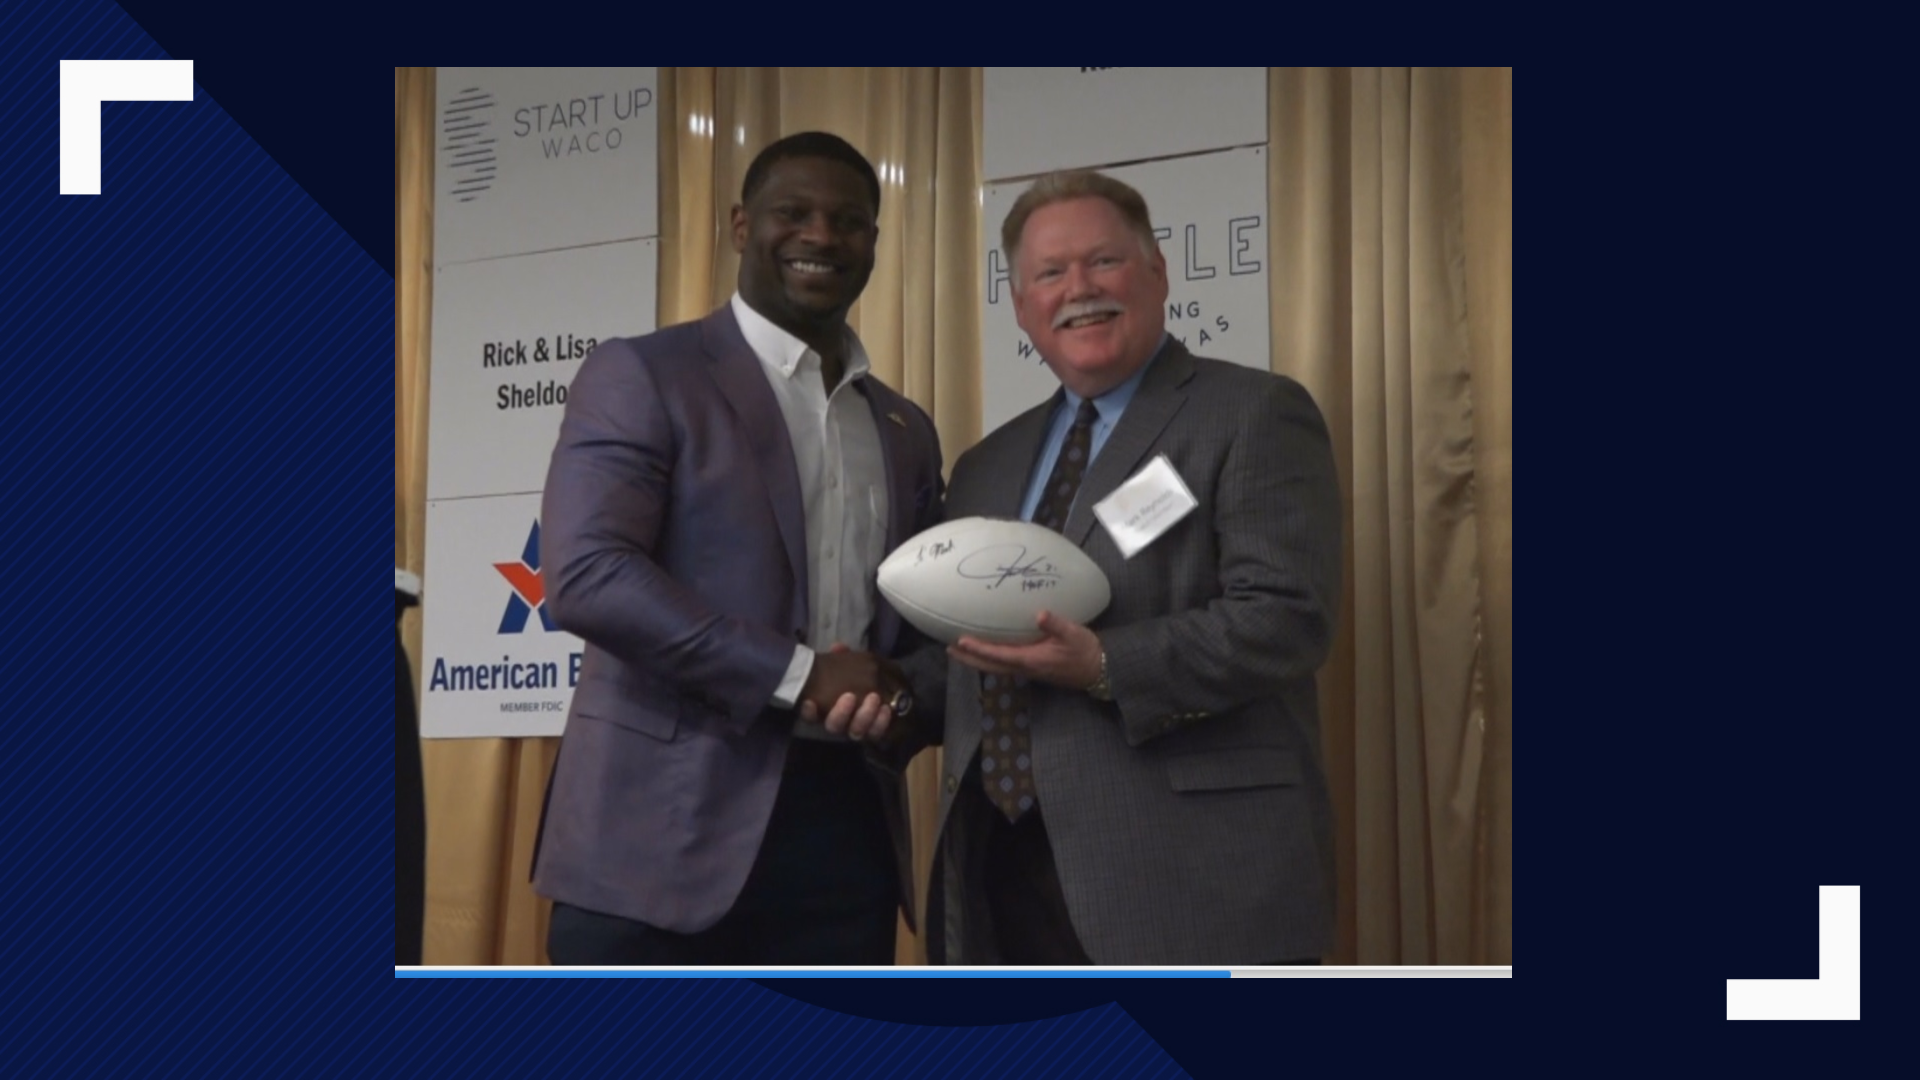 Local entrepreneurial leader Start Up Waco held a grand opening Friday to reveal its new space to create and elevate small businesses, and an NFL Hall of Famer was in attendance.